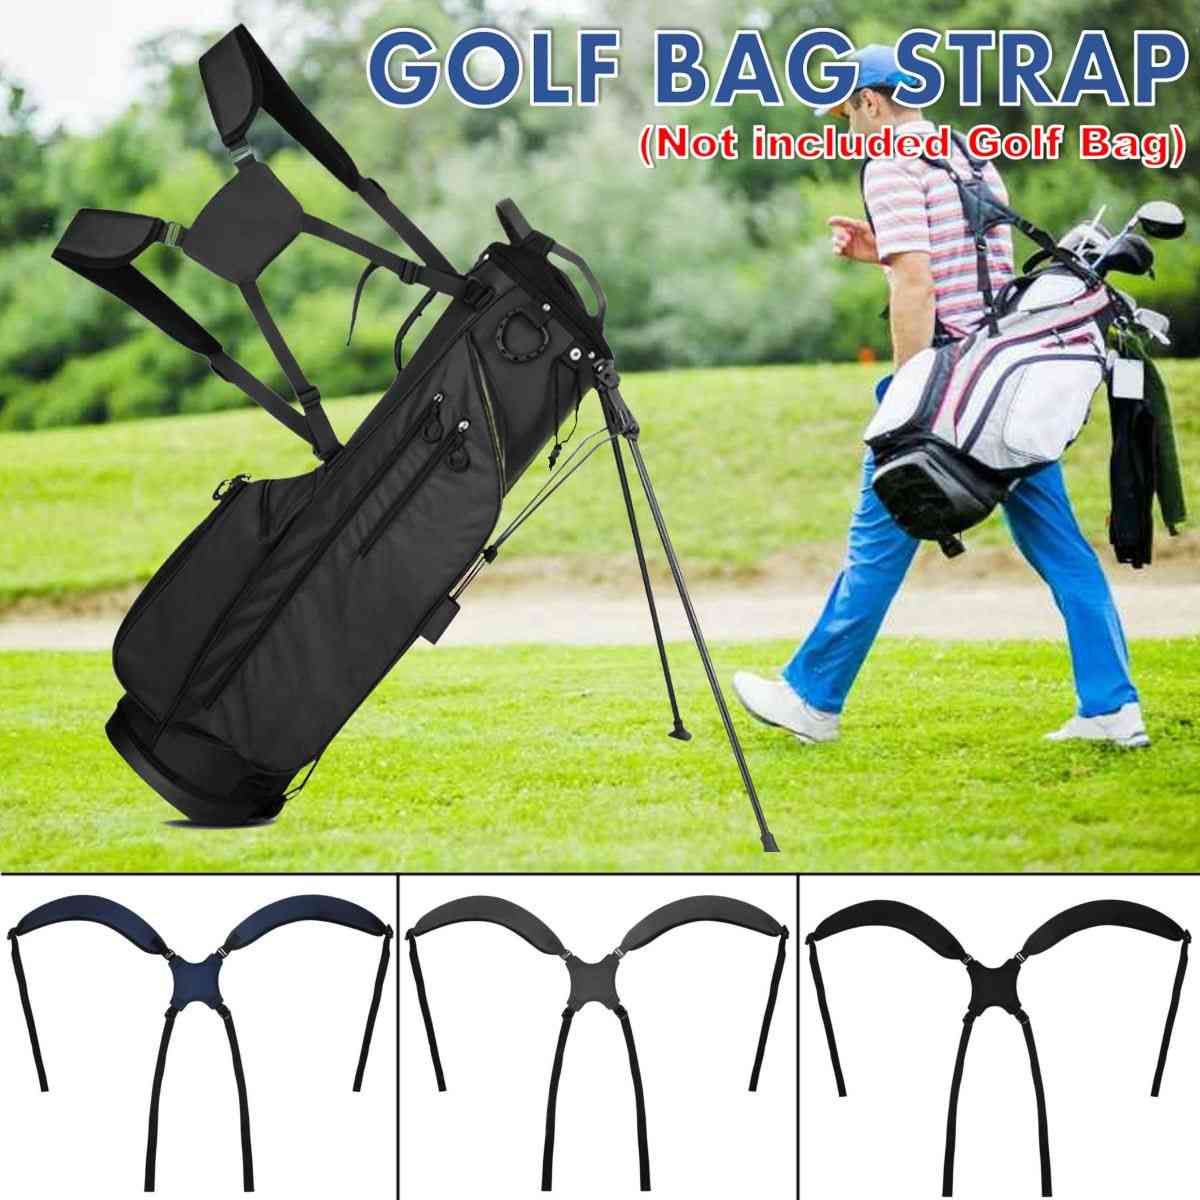 Golf Shoulder Strap Padded For Carry Bag, Foldable/ Adjustable/ Replacement Accessories